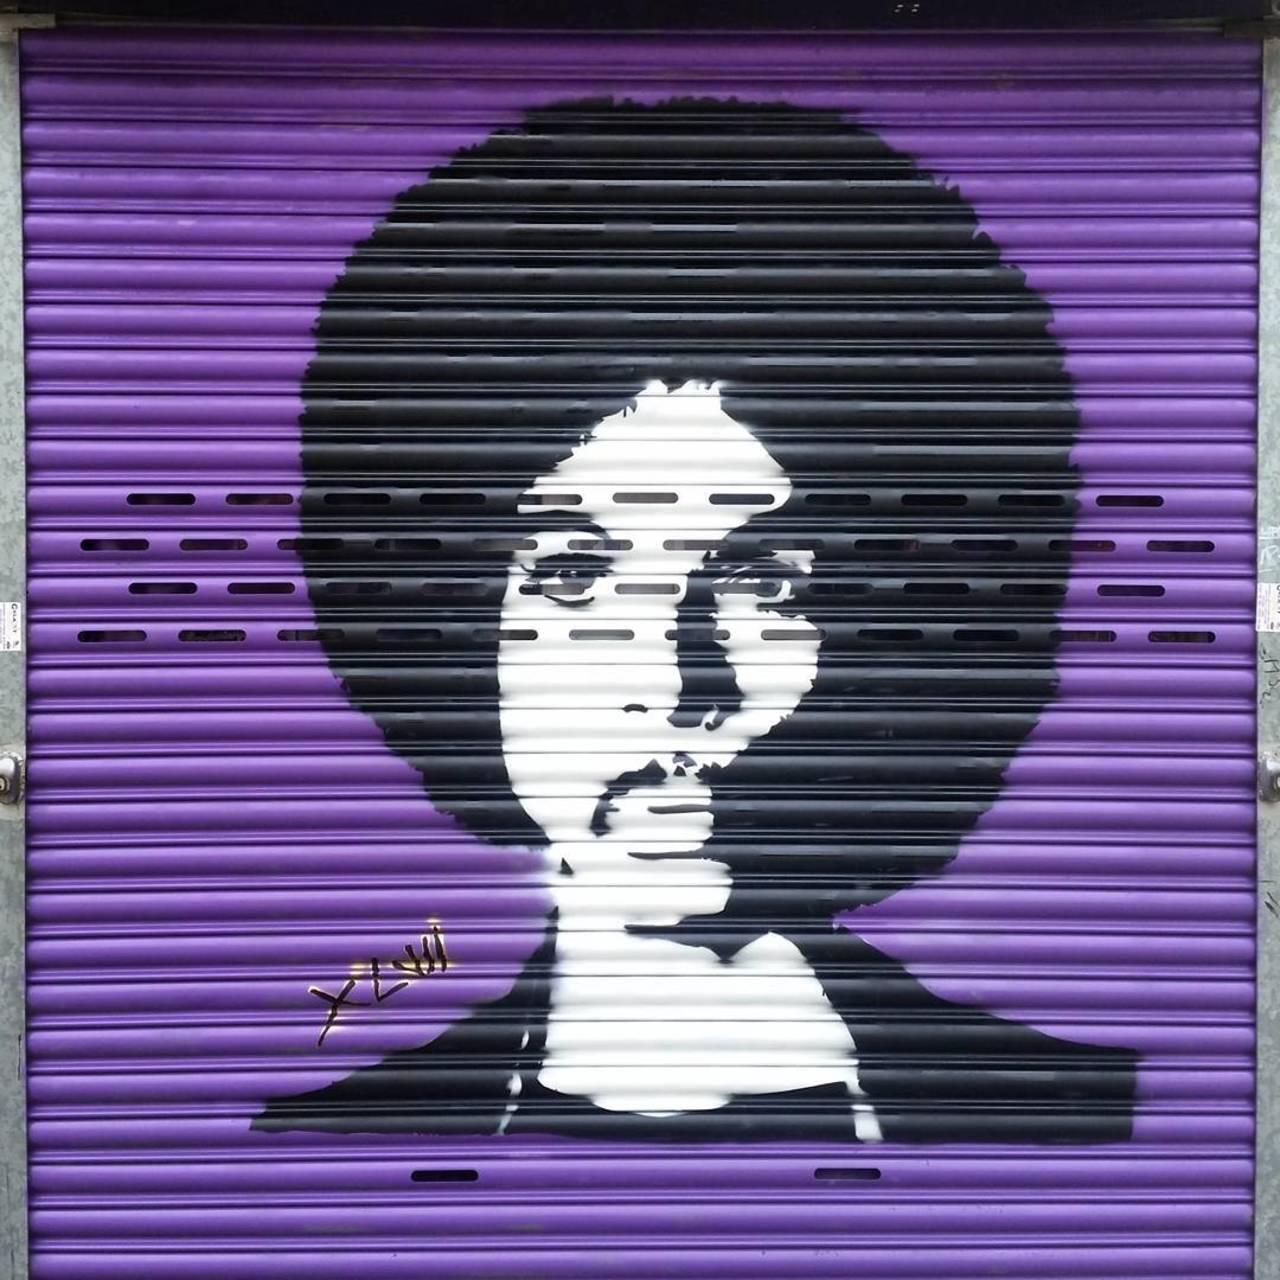 #Prince #streetart by #mrxlvii on the shutters of @vapeoriumwcliff #Southend#PrinceArt #PRINCE4EVER  https://t.co/K3M9ImXXk2